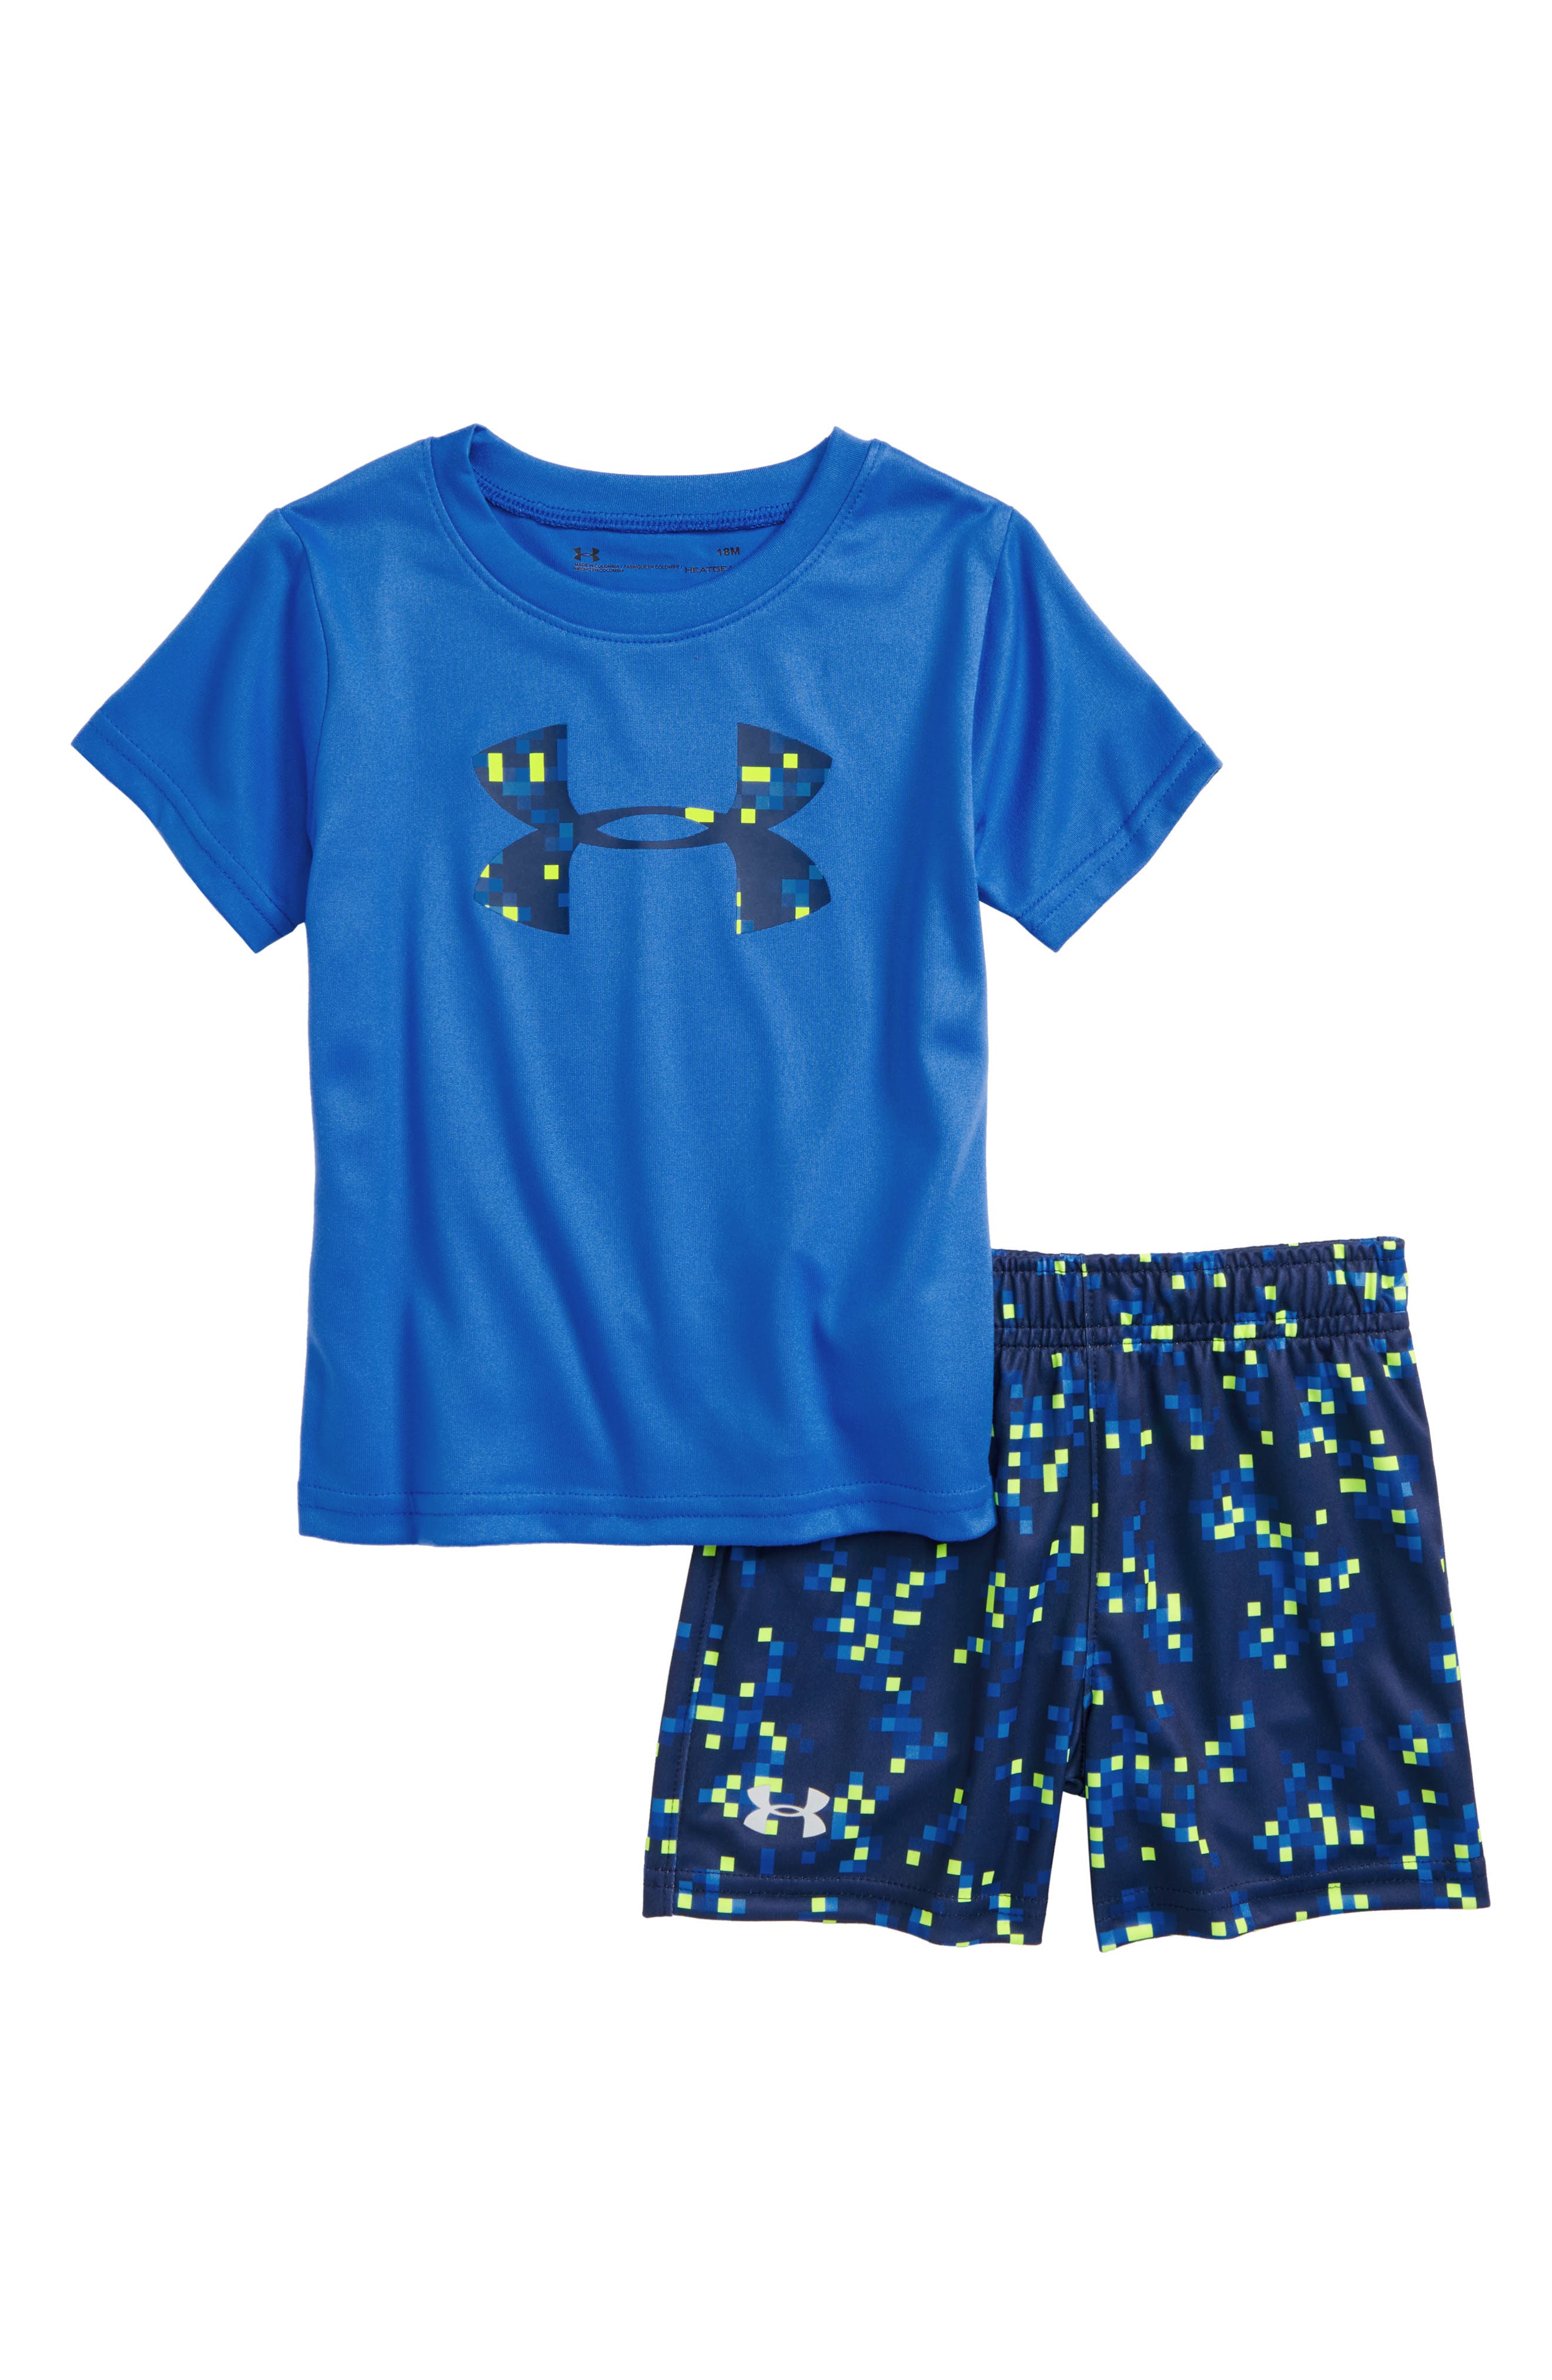 under armour shorts and shirt set